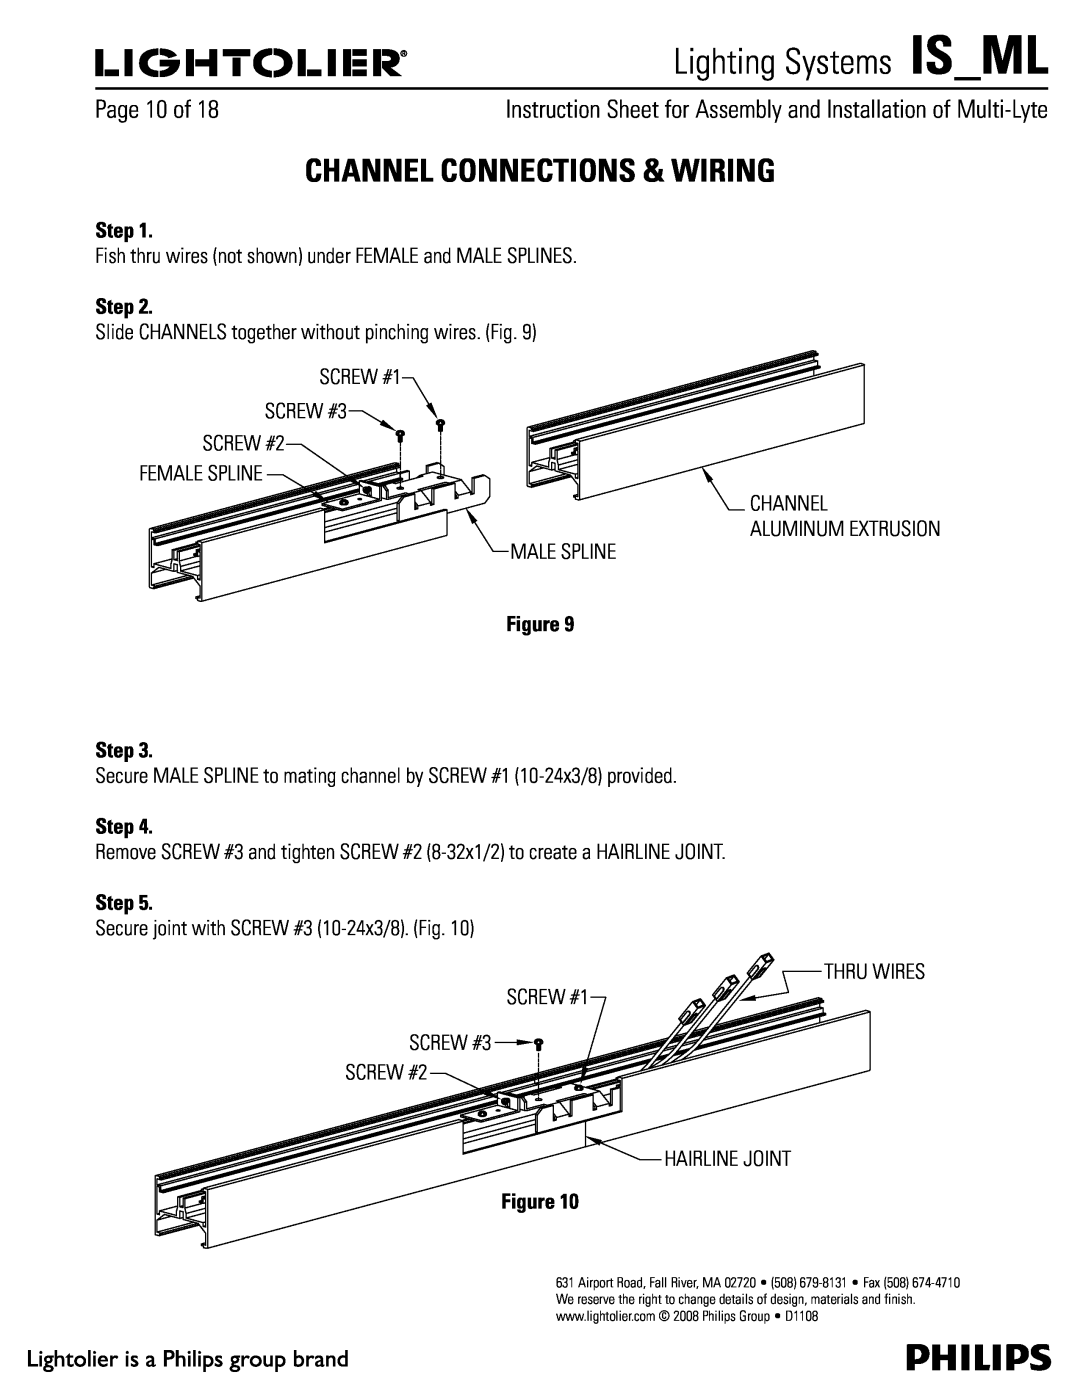 Lightolier MME & MFE, MMC & MFC, MMA & MFA, MMD & MFD Channel Connections & Wiring, Figure Step, Lighting Systems IS ML 